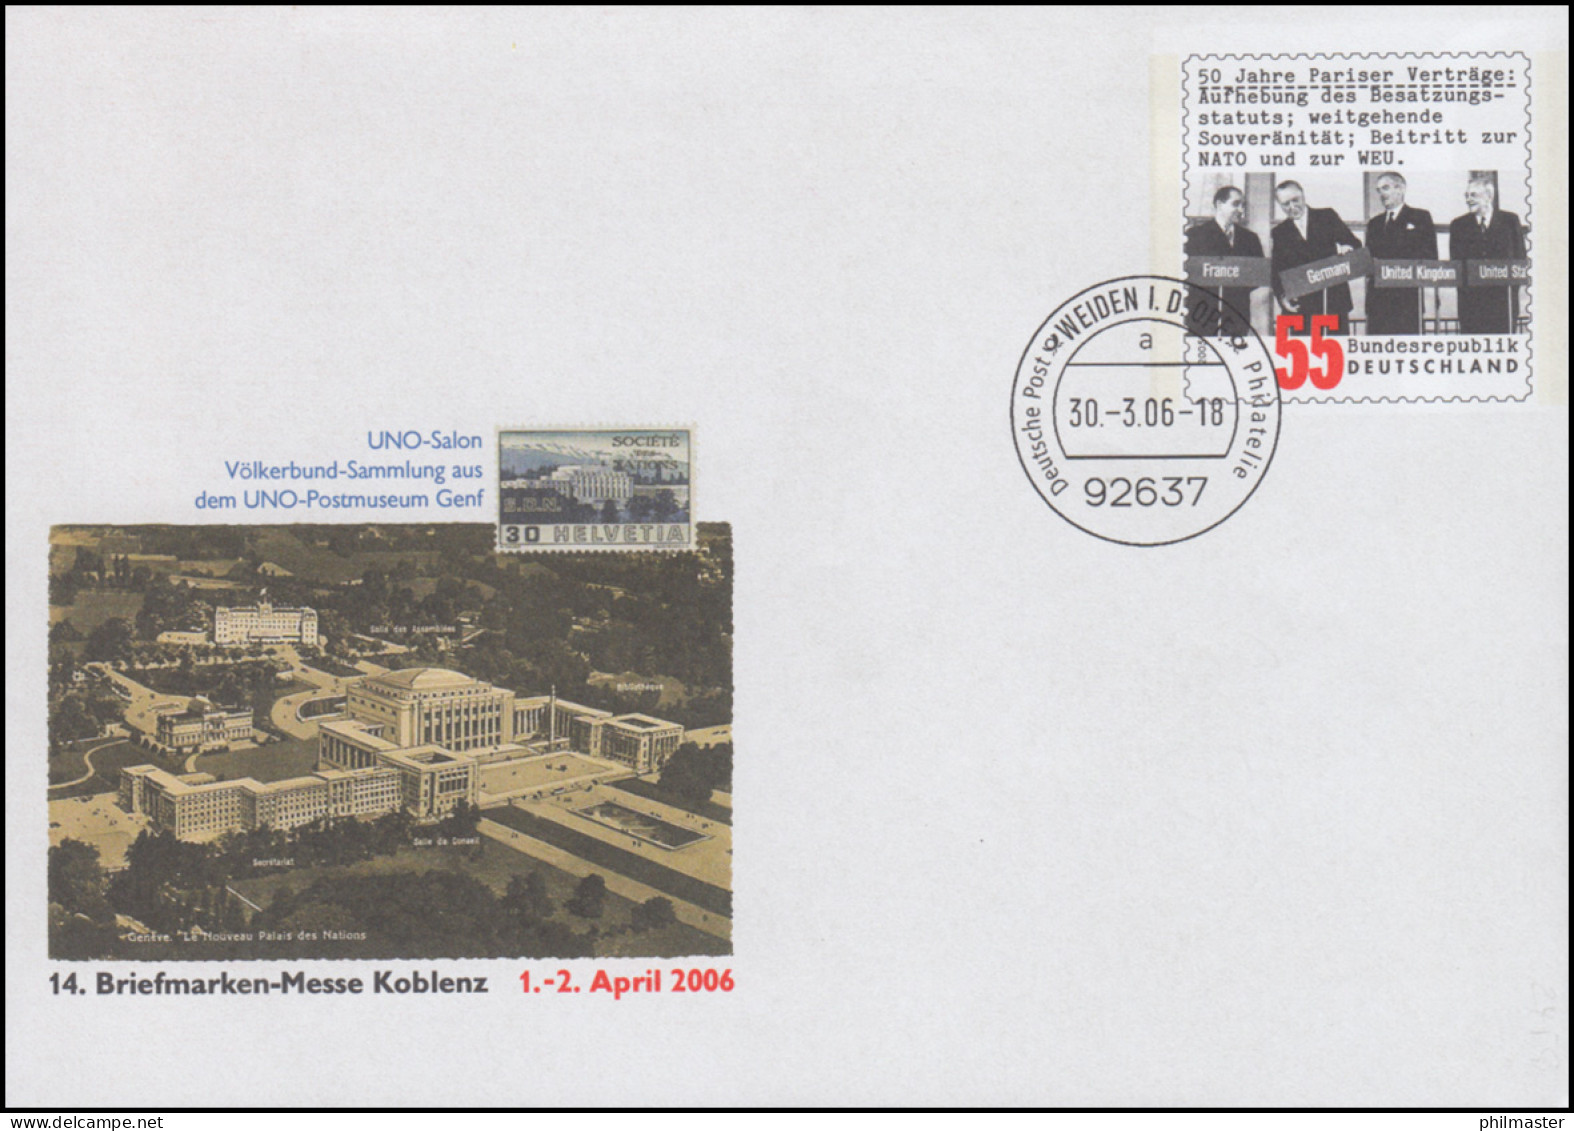 USo 116 Messe Koblenz - UNO Postmuseum Genf 2006, VS-O Weiden 30.3.06 - Covers - Mint